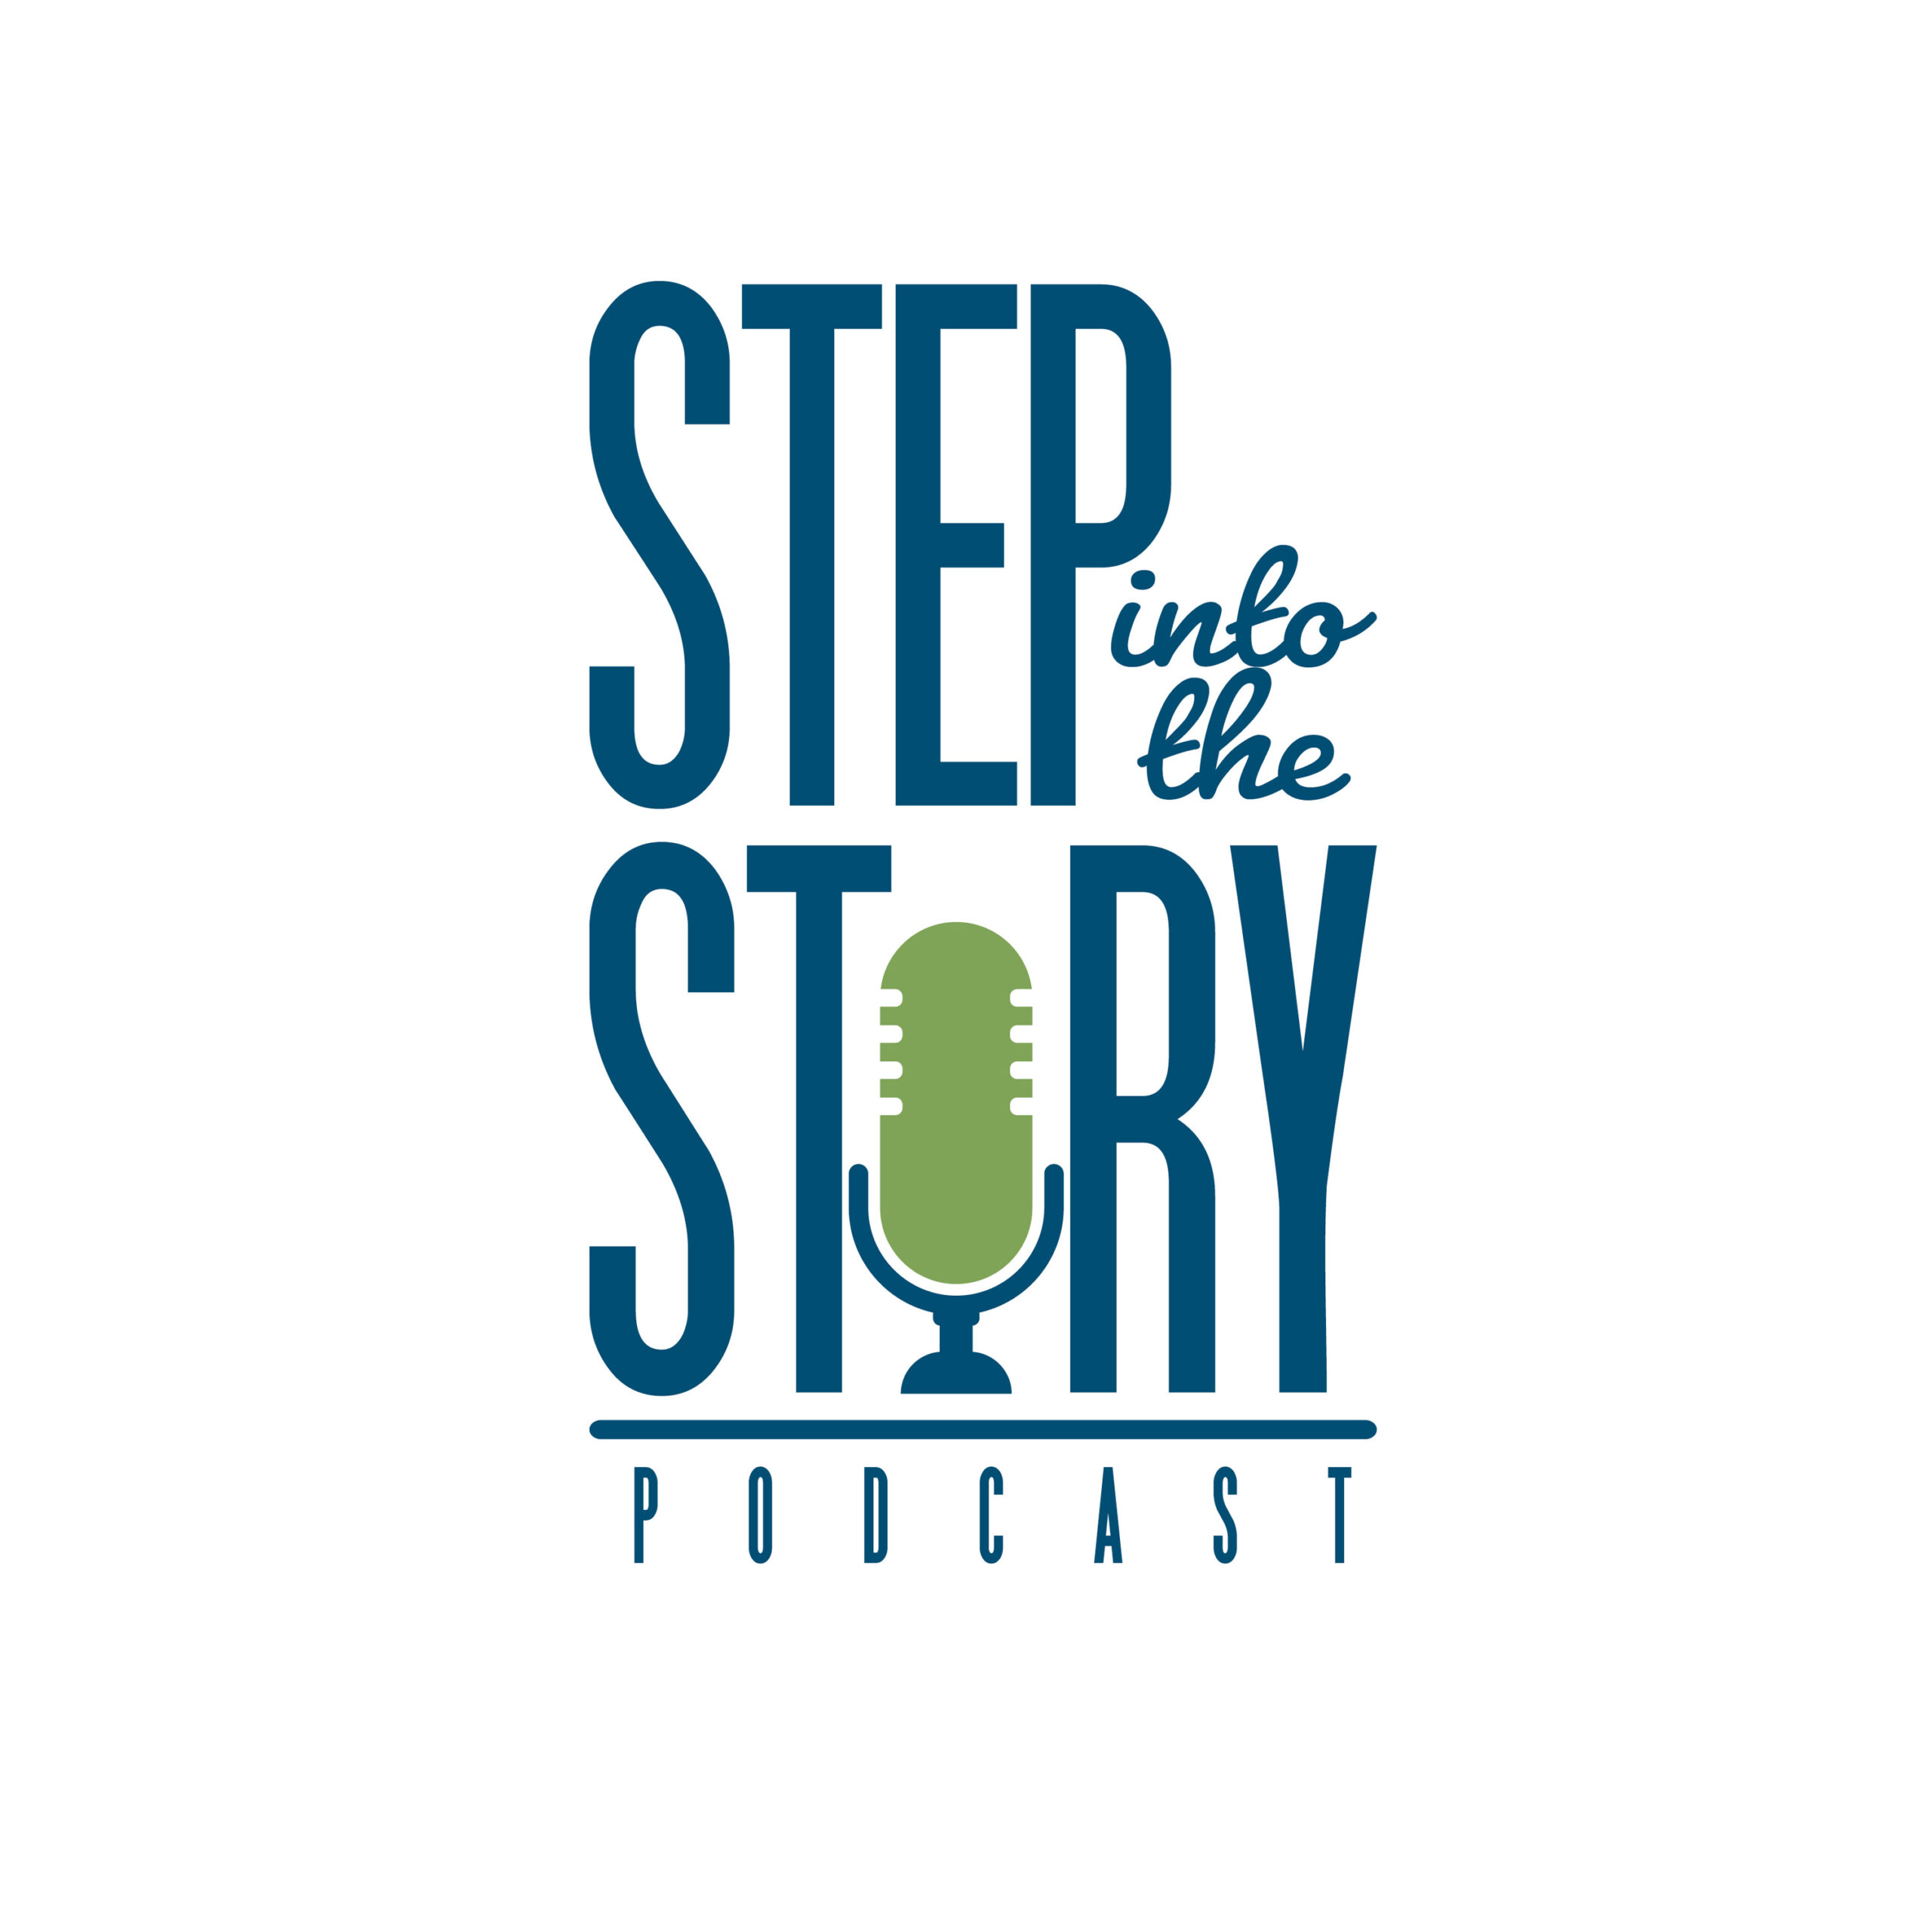 Step Into The Story Podcast Logo